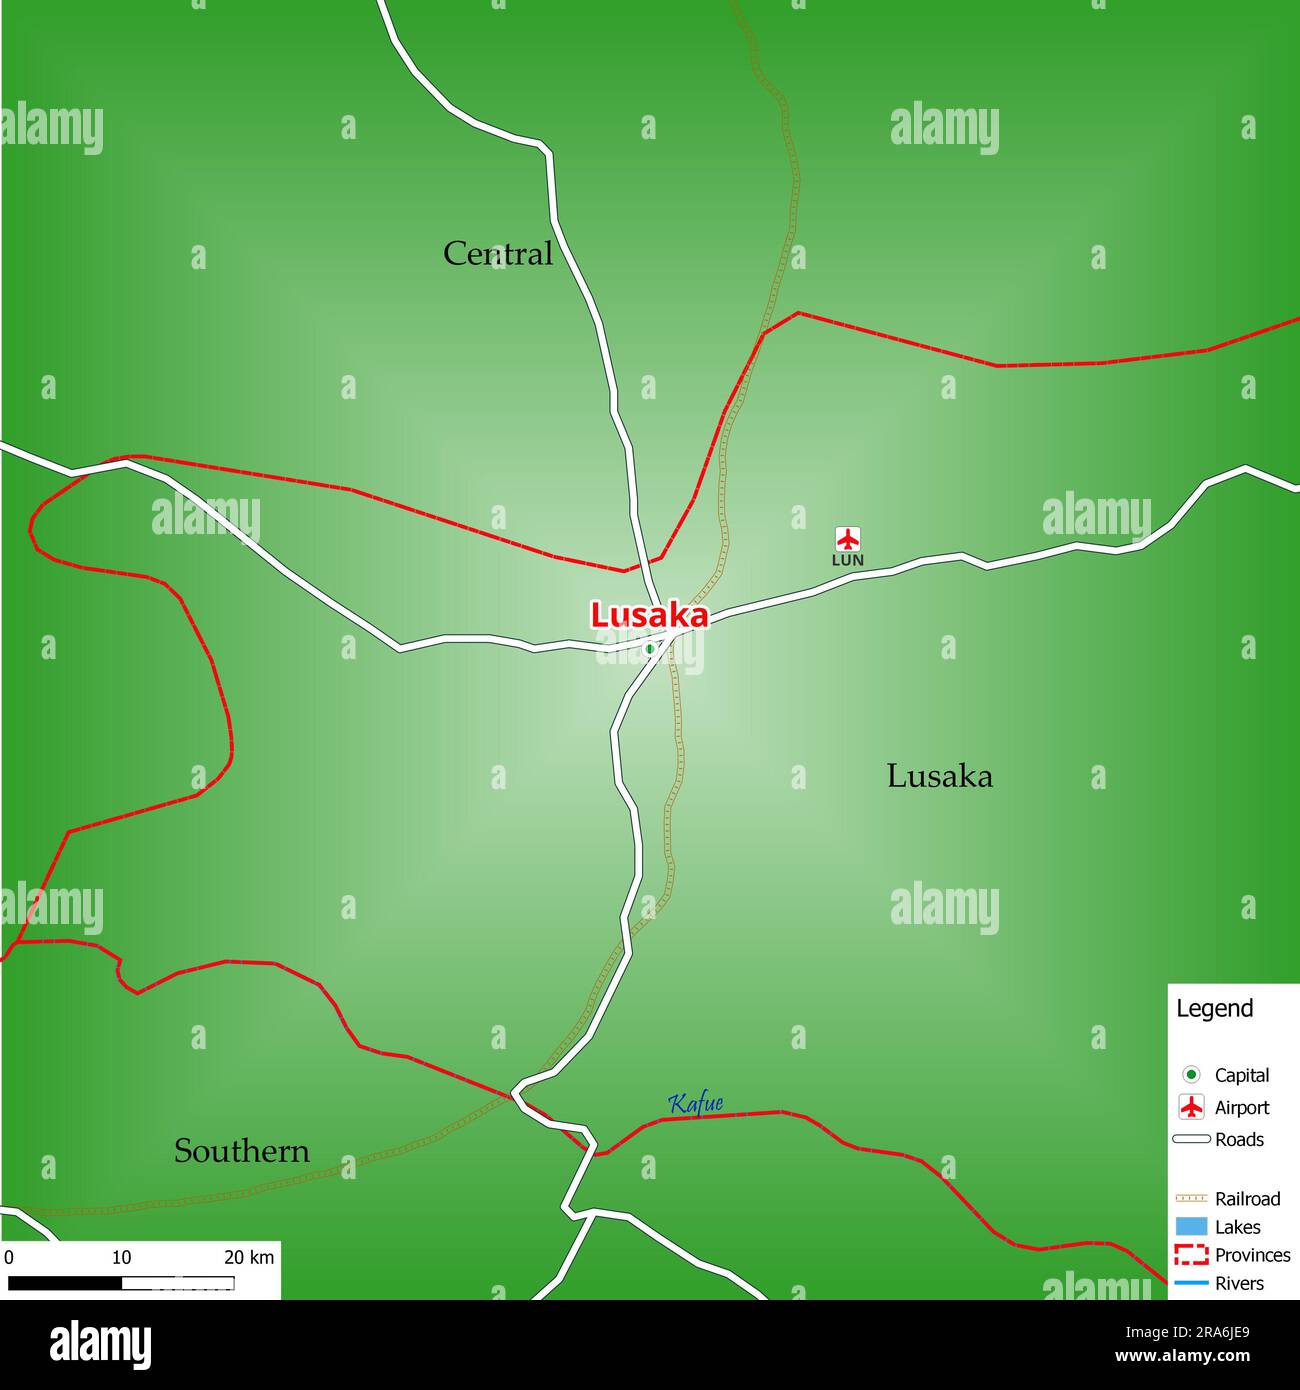 Map of the capital city Lusaka with main streets, rivers, lakes, urban areas and names of counties near Stock Photo